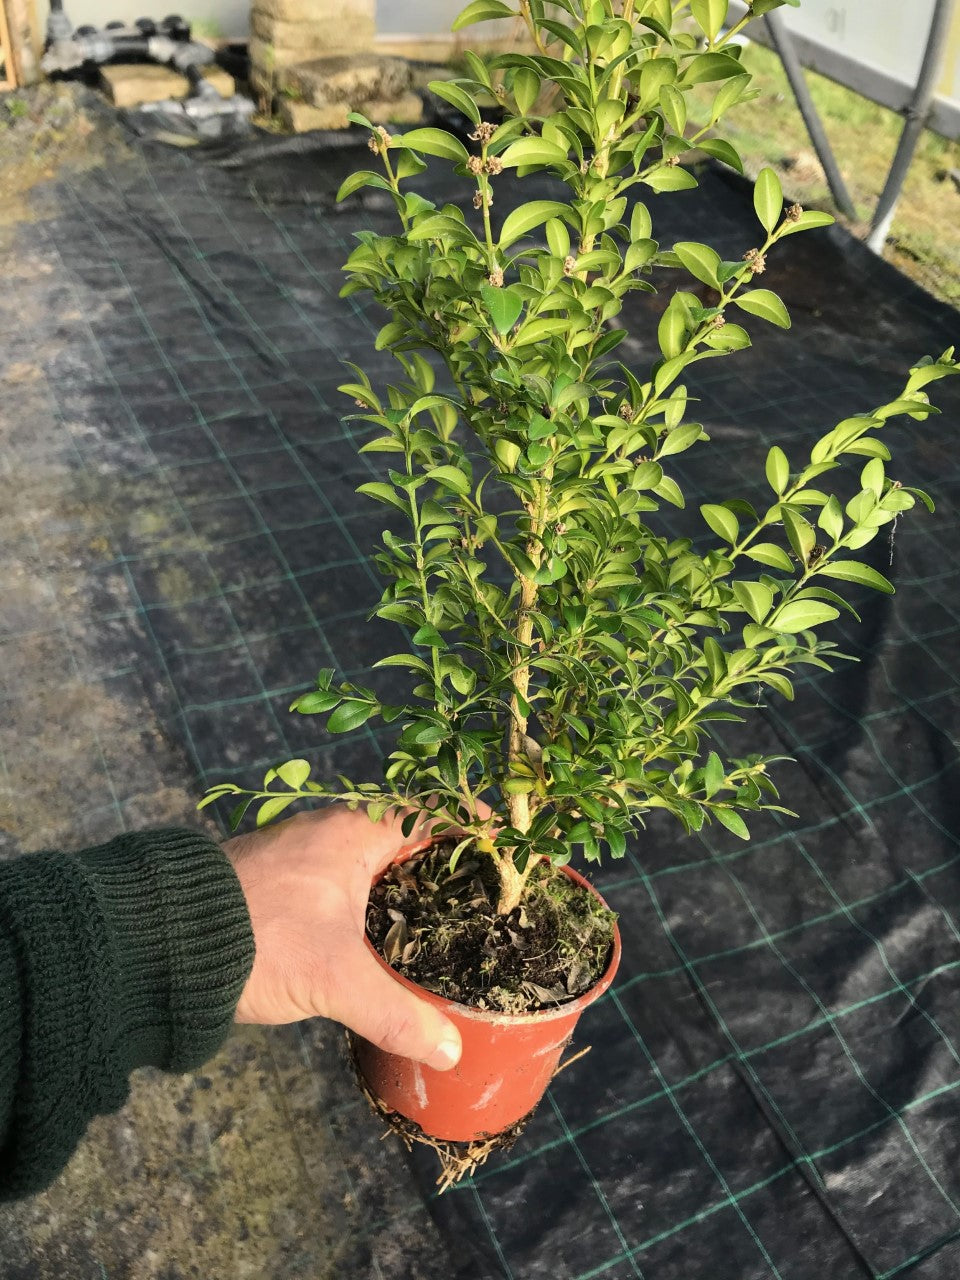 10 Common Box Hedging (Seconds) - approx 30-40cm Tall in Pots Buxus Sempervirens